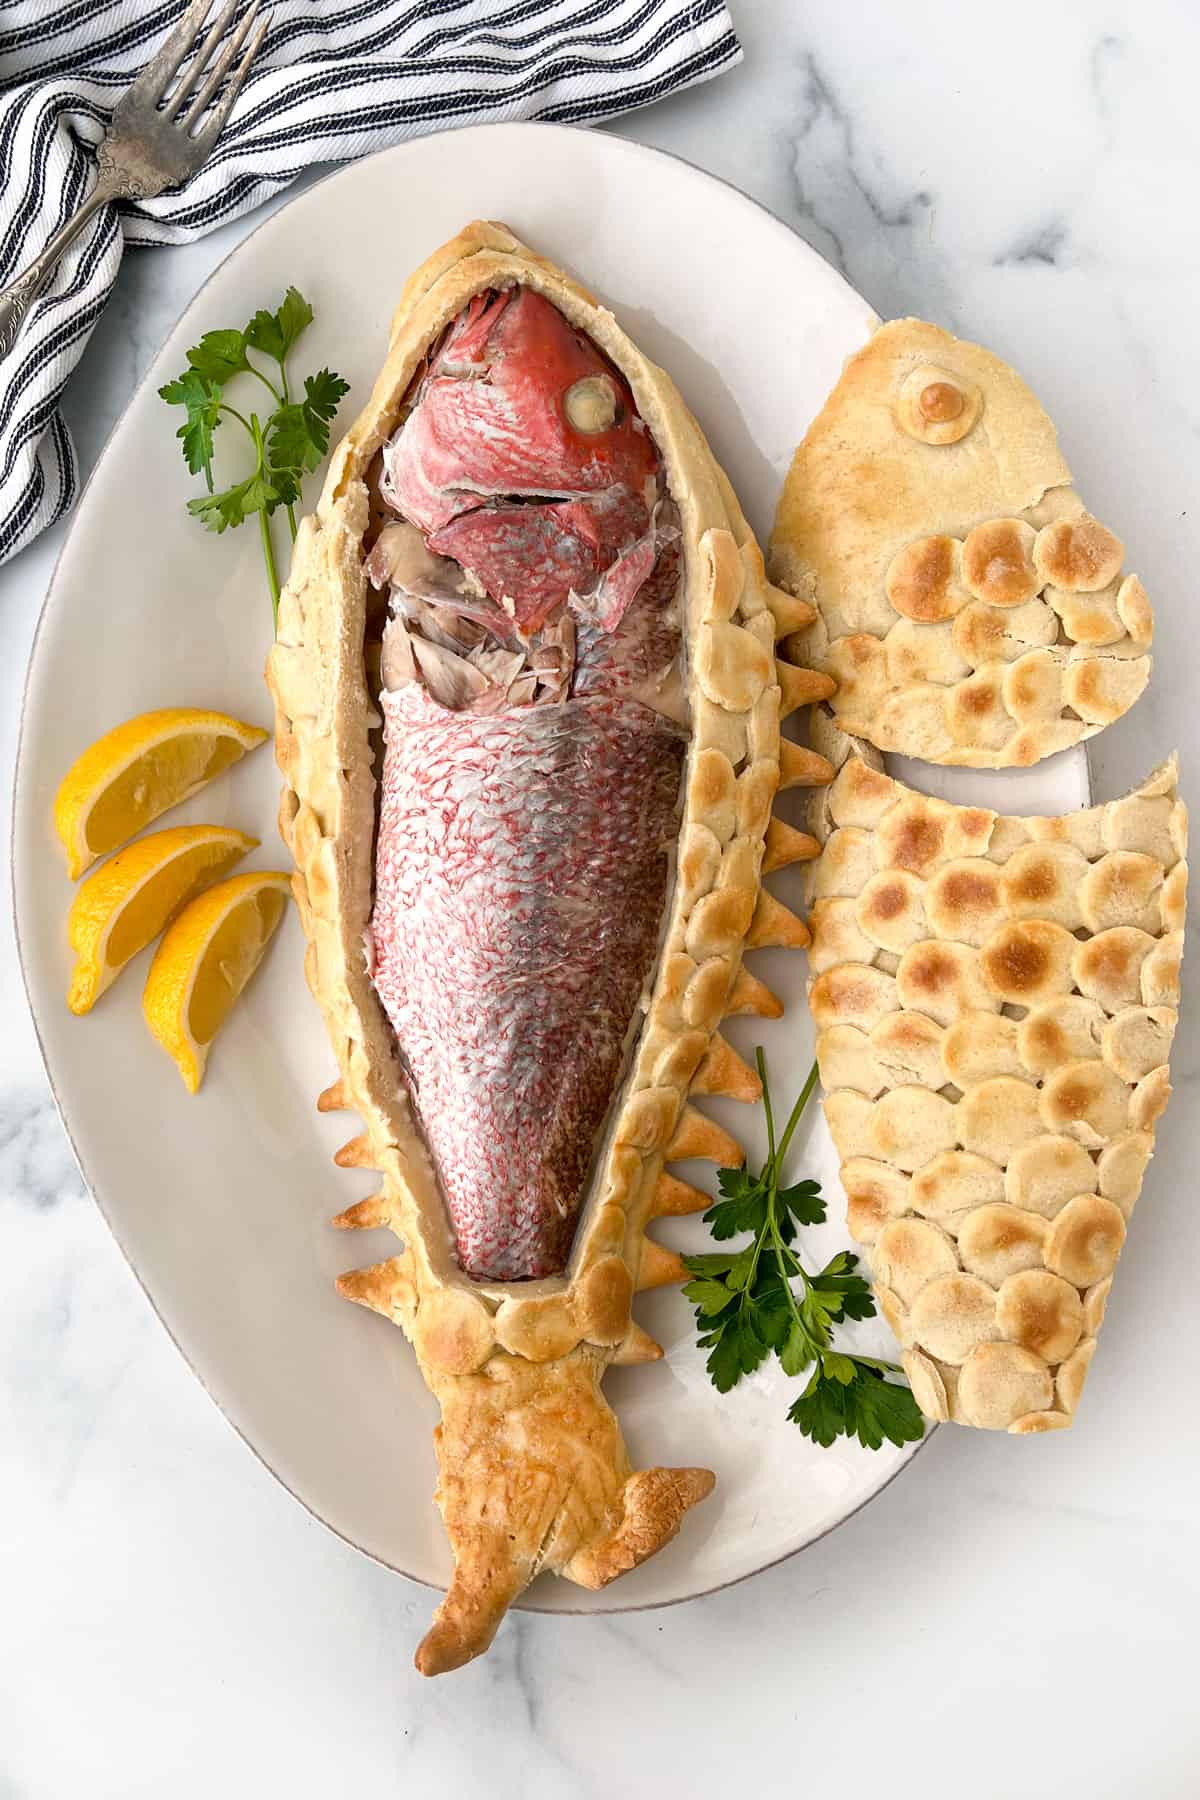 a full skin-on snapper inside a cut-open salt pastry with the top of the pastry lying next to it on a plate garnished with parsley and lemon